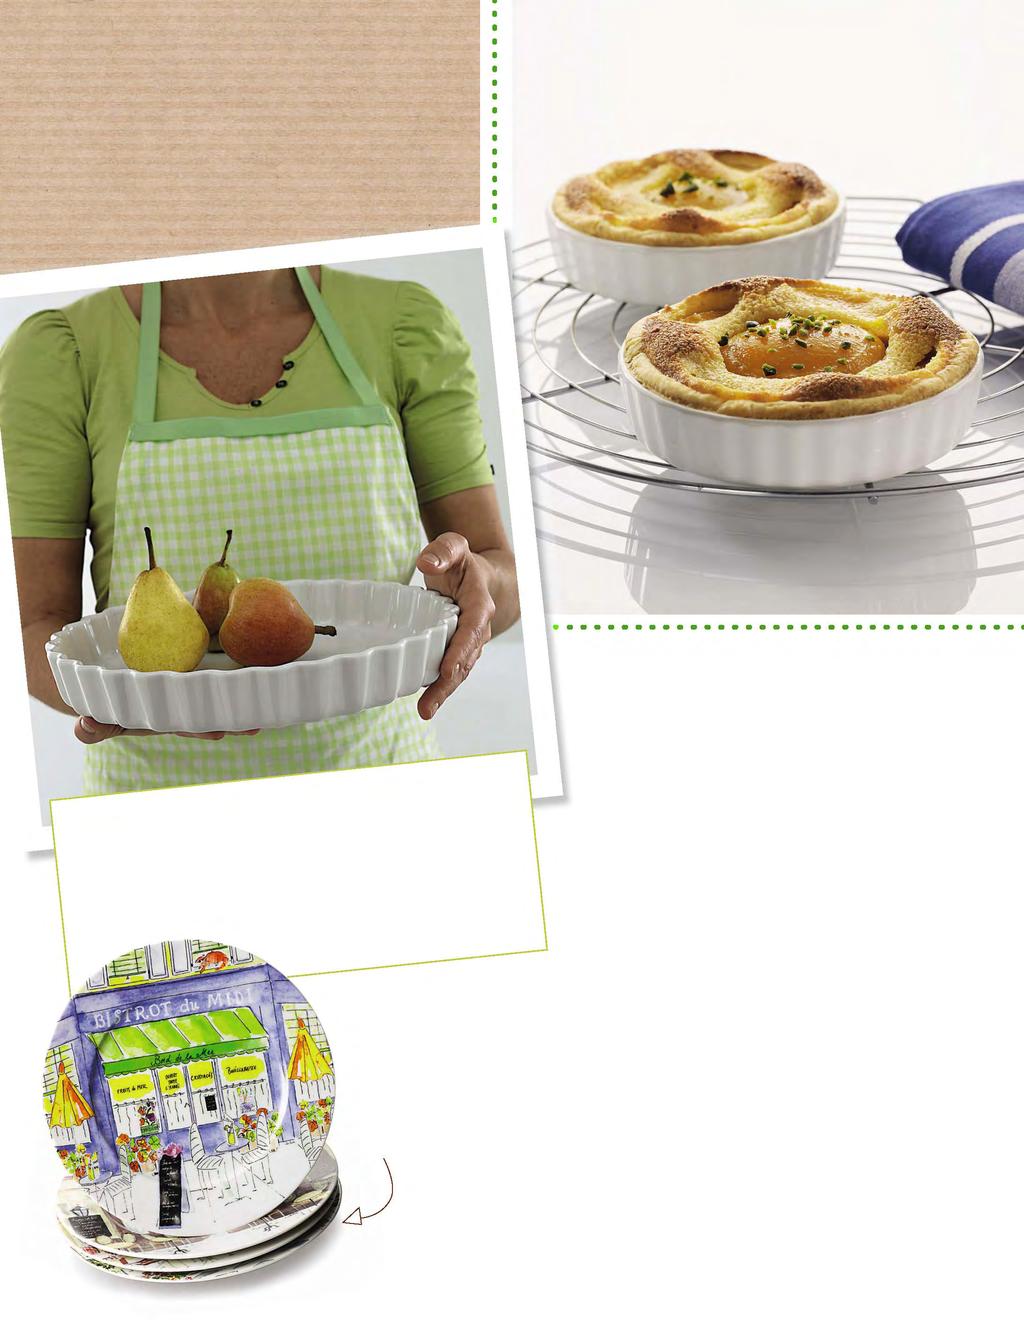 Di s pies Individual round flan dish plain 612426 - Cm ø 12,5 - Inch ø 4 3/4 With Revol, I always have the dish I need to fix a treat for my grandchildren or whip up a last-minute quiche to share.